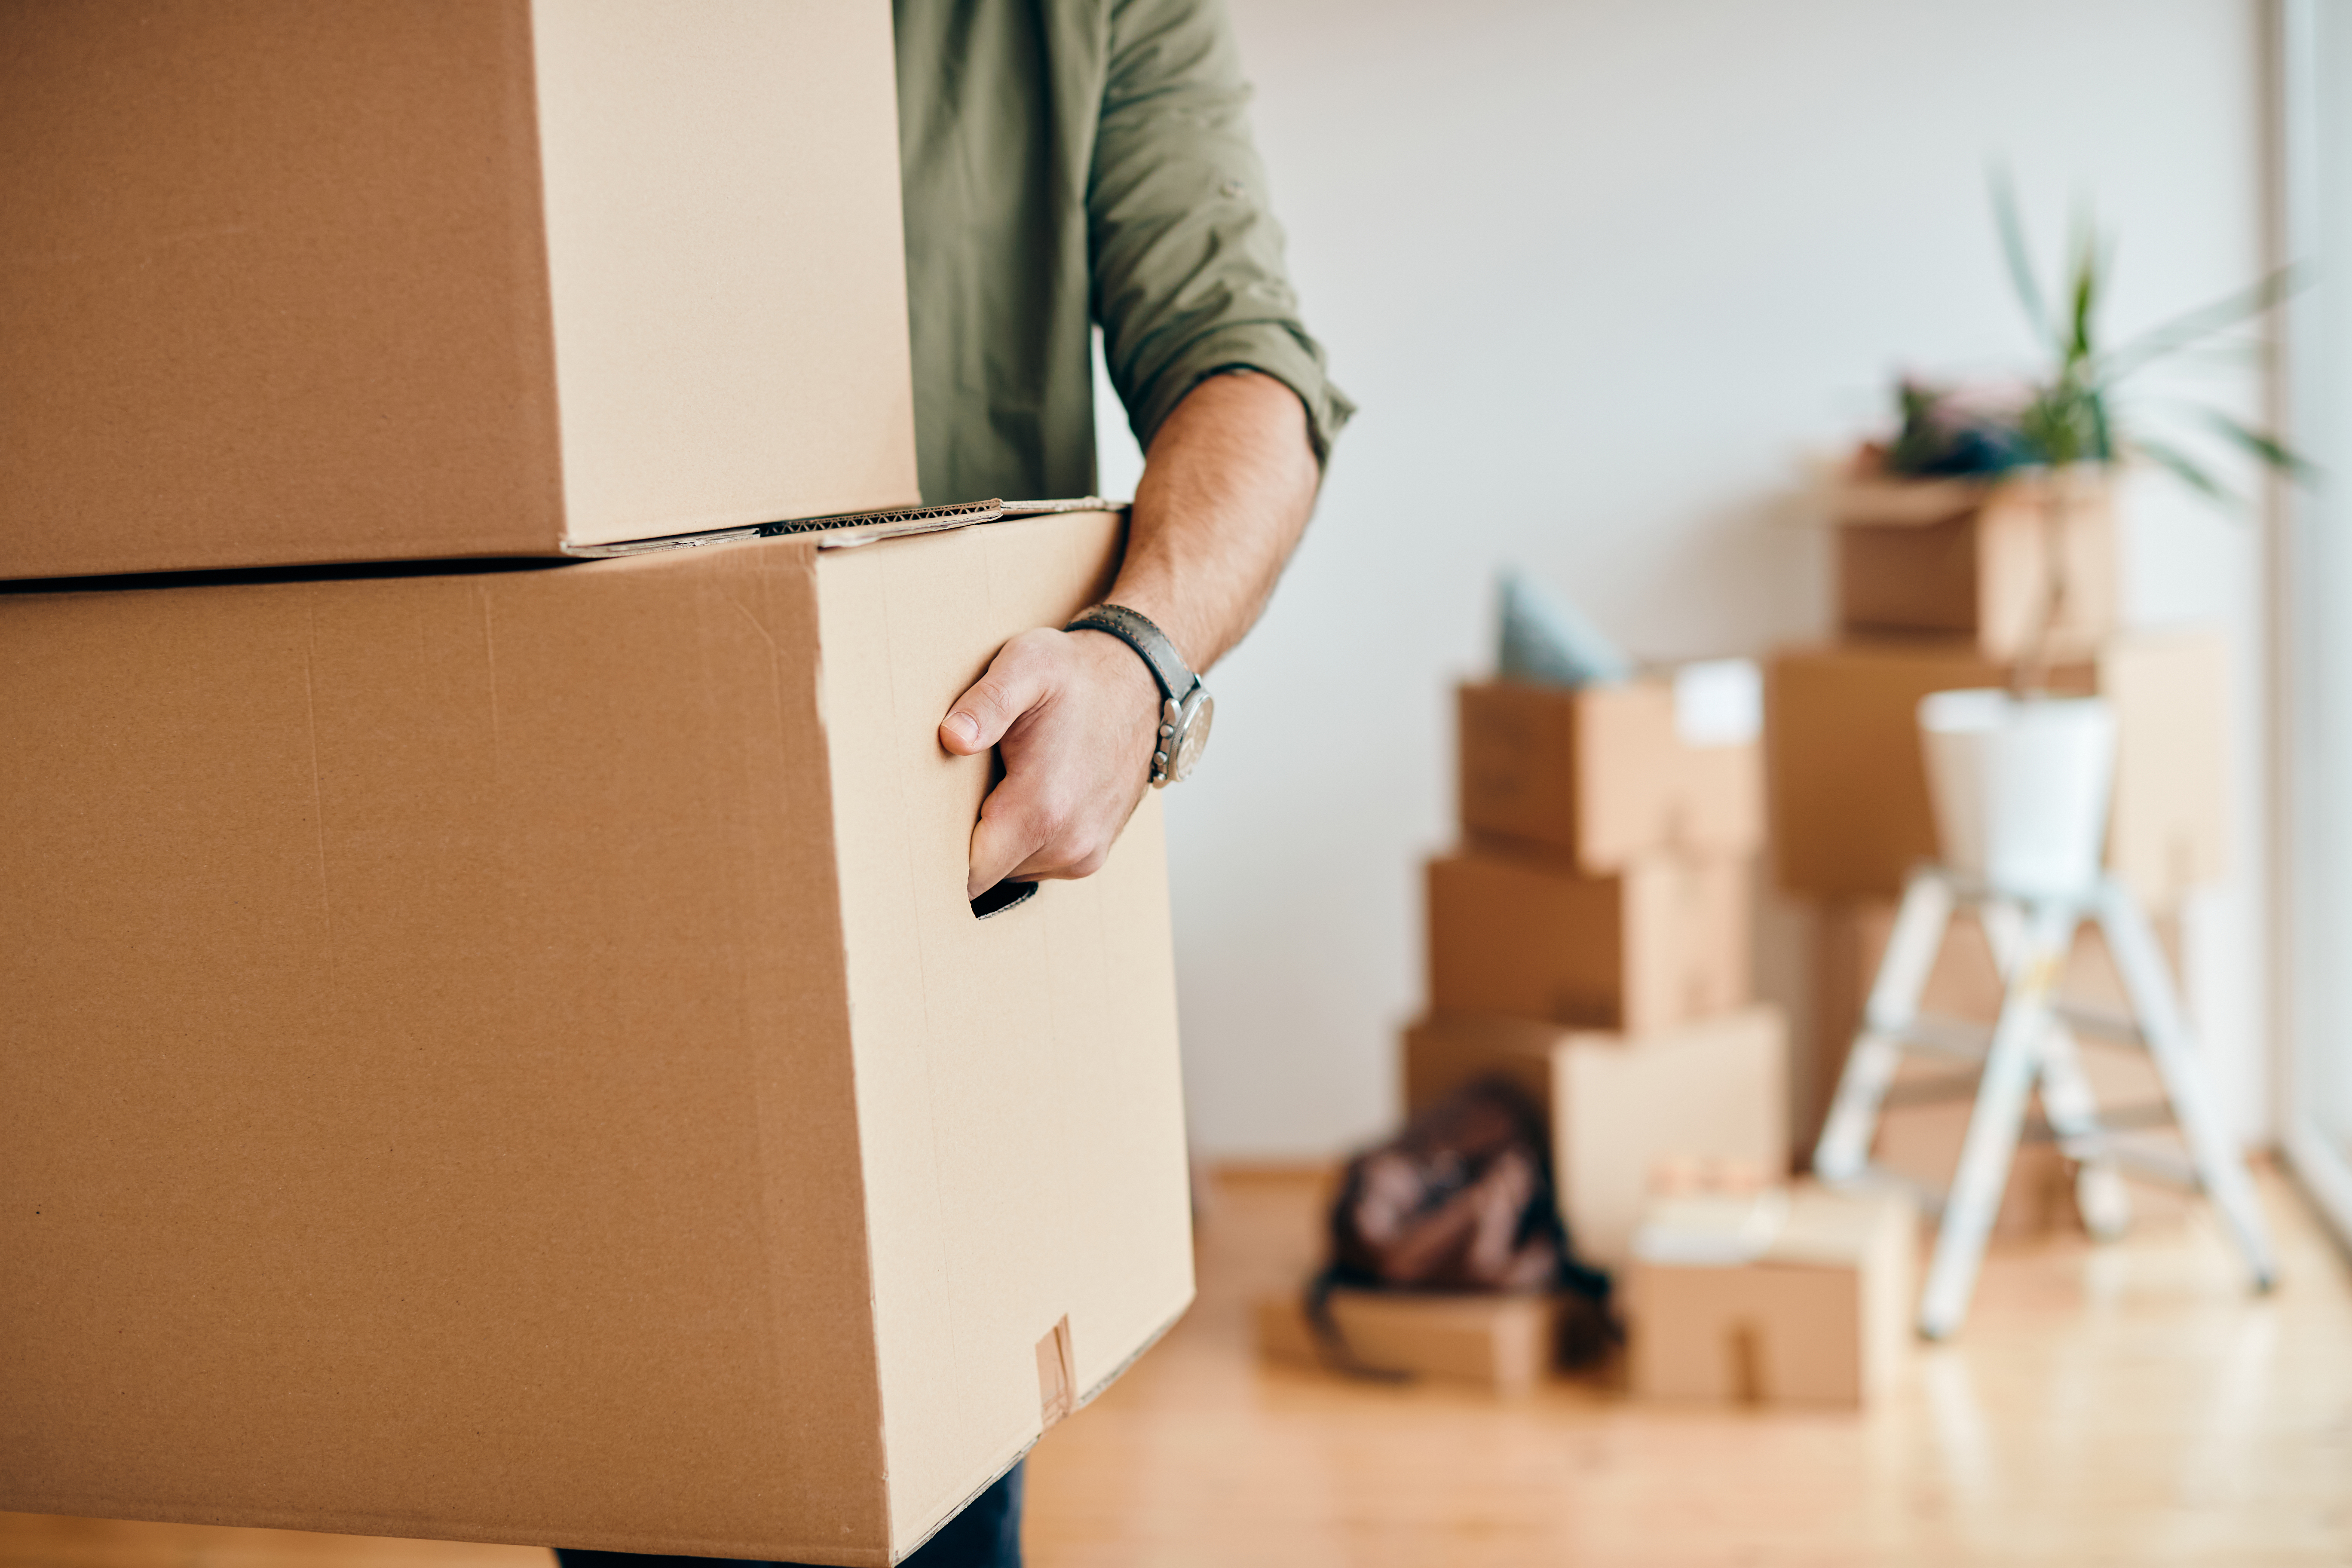 A man packing moving boxes | Source: Shutterstock